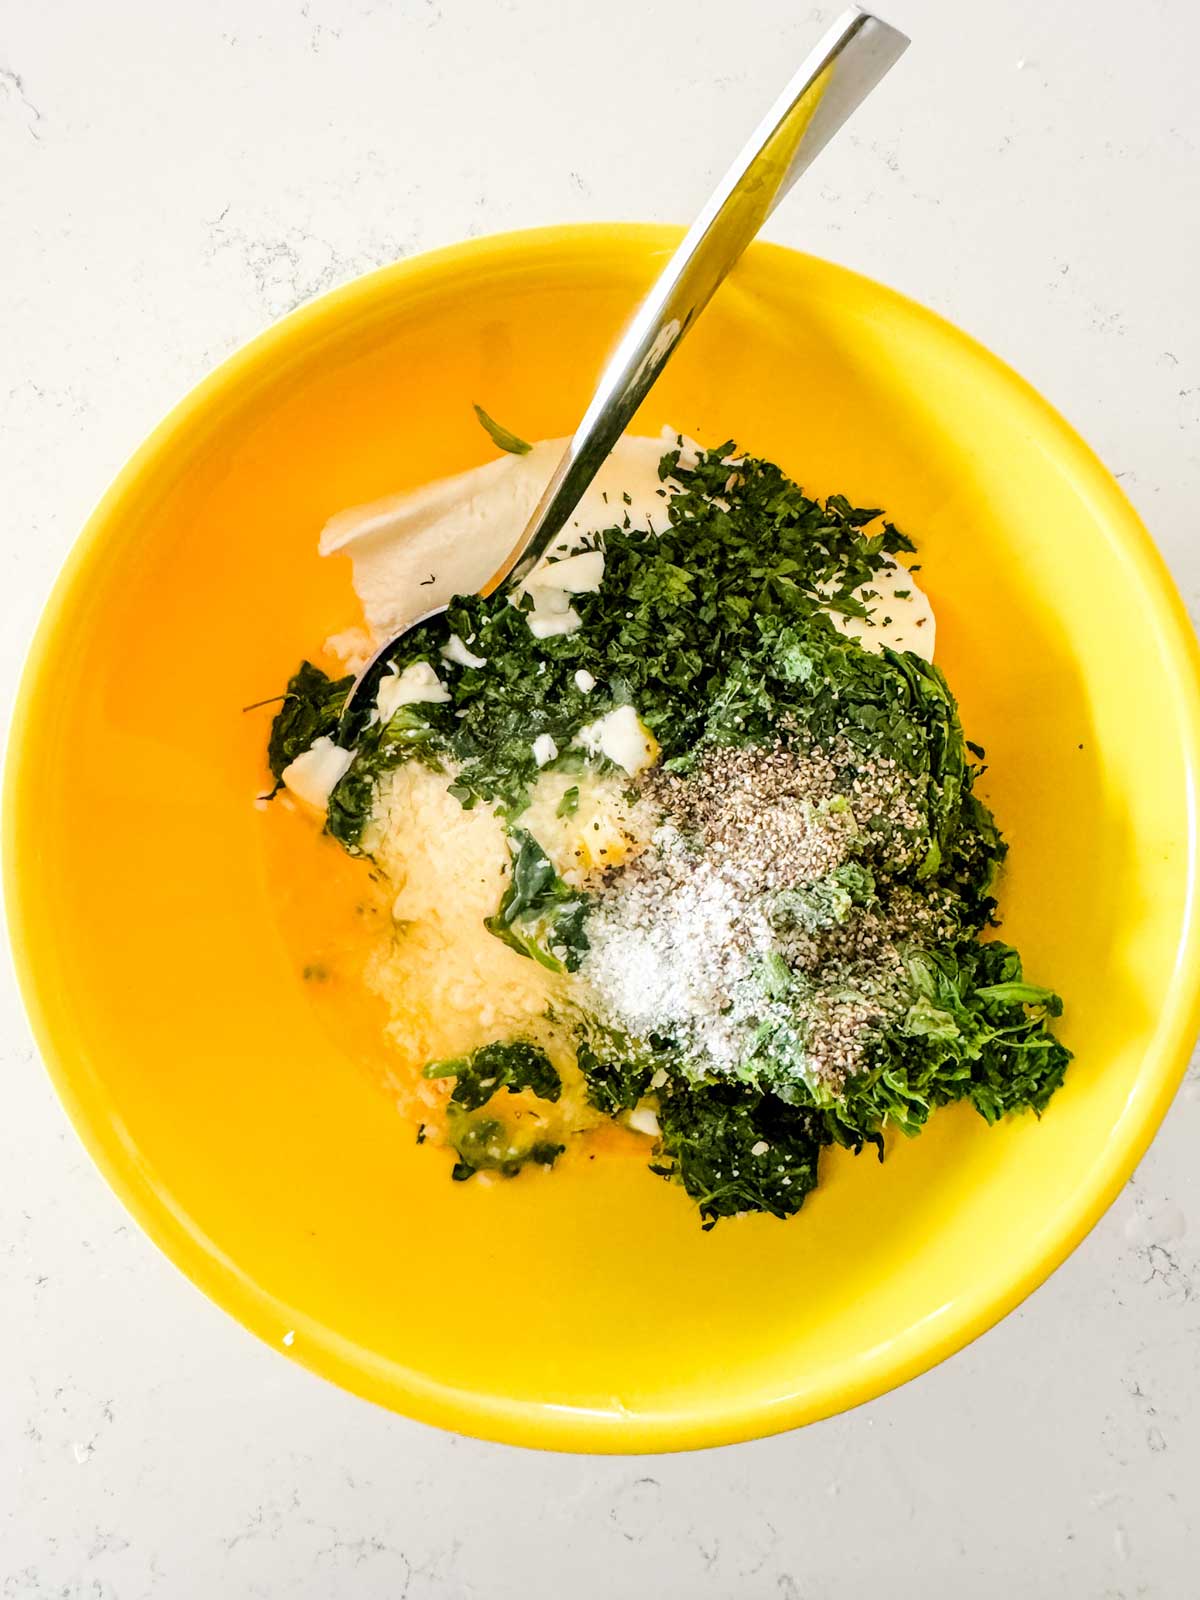 Ricotta, spinach, egg, and seasonings in a yellow bowl.